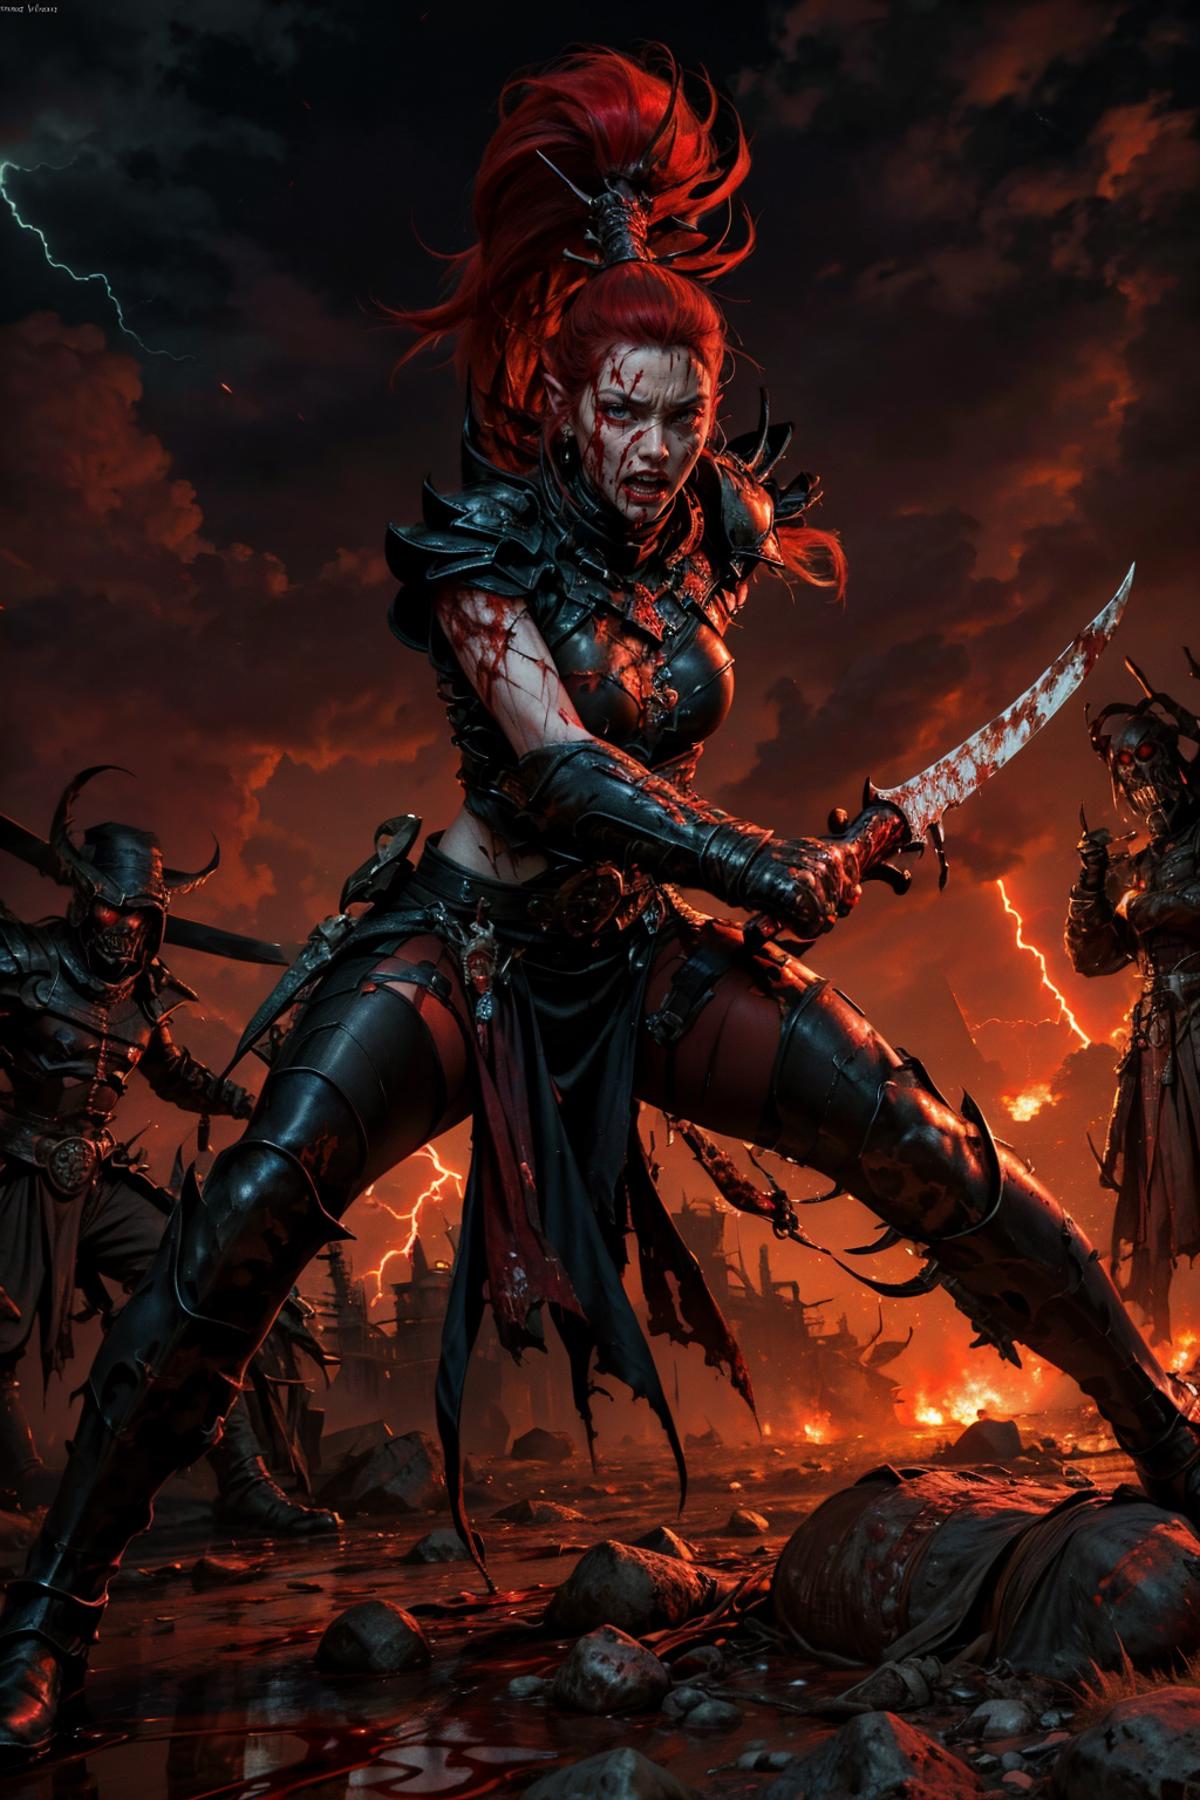 A woman with red hair and blood on her face is holding a sword in front of a battle scene.